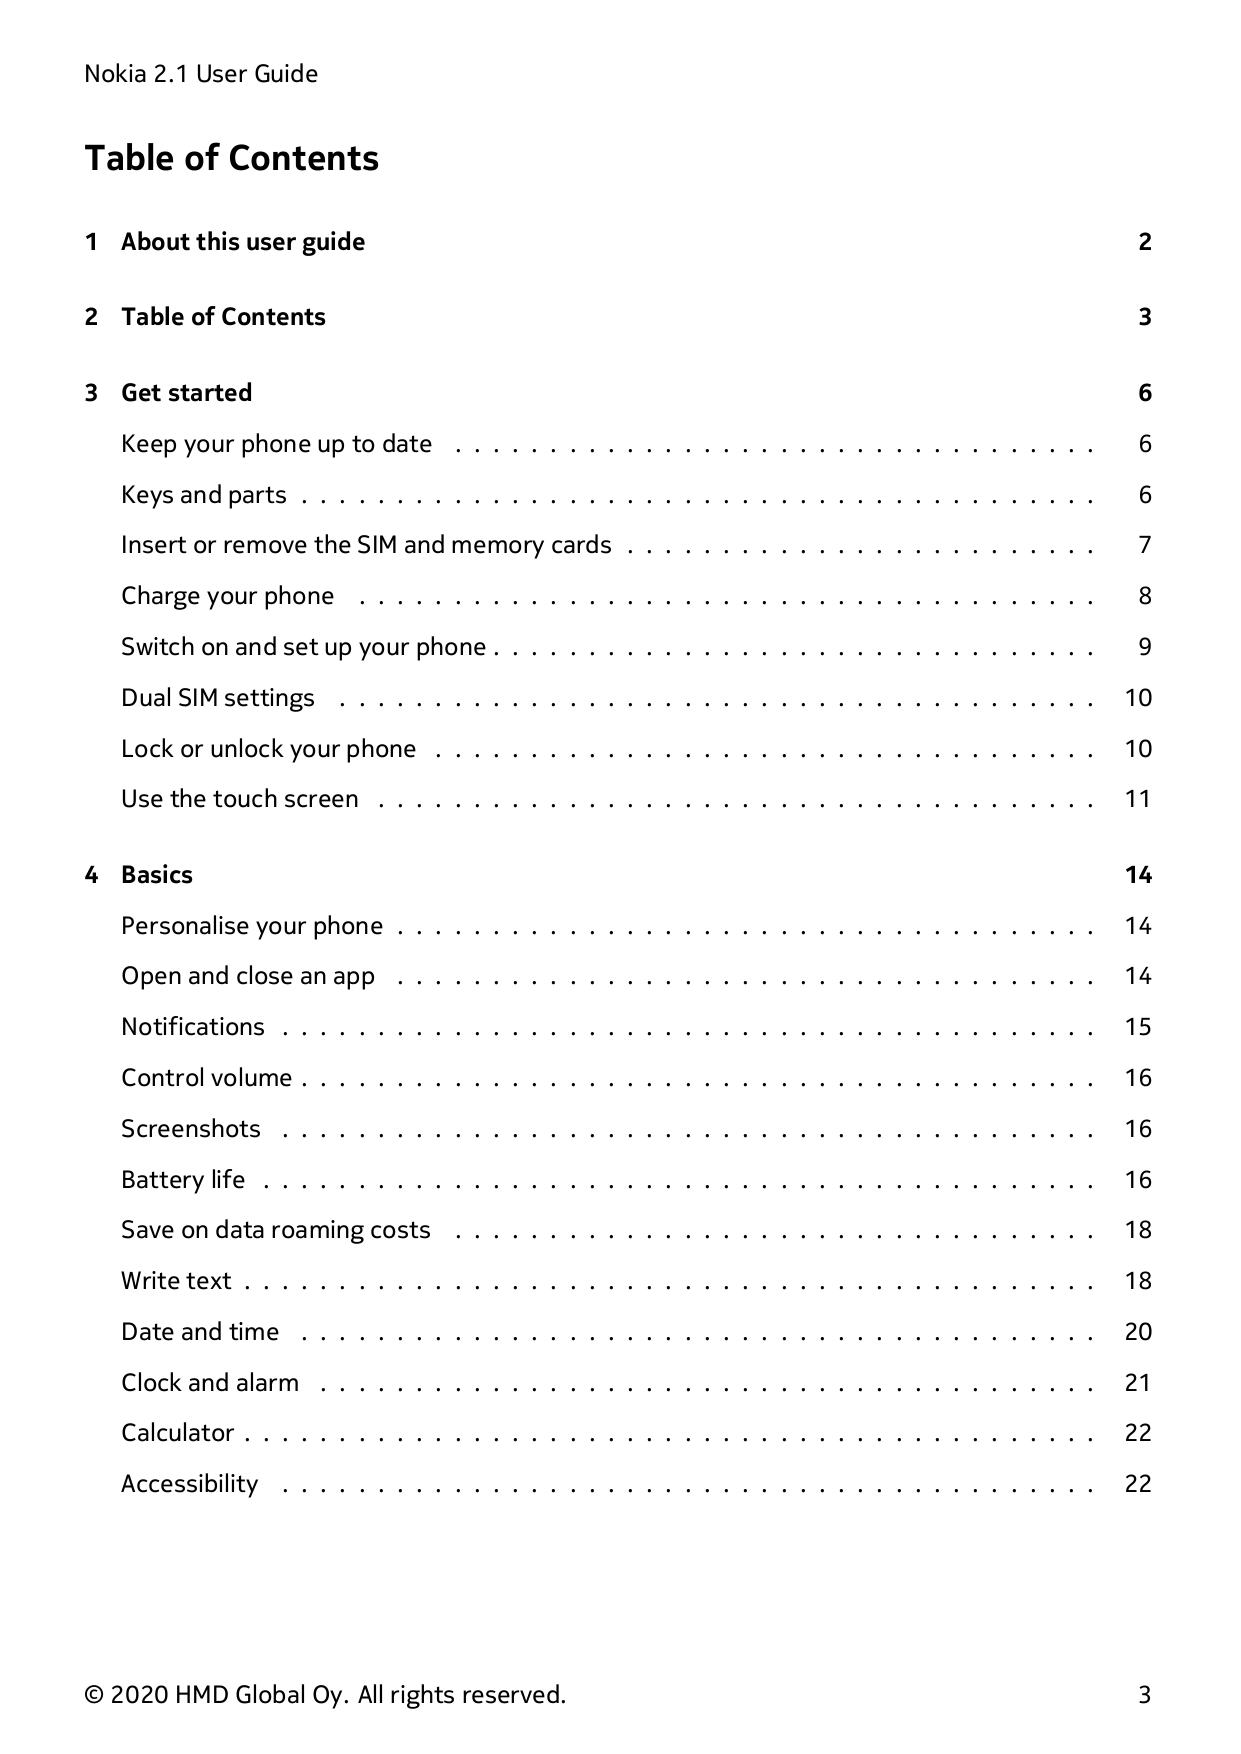 Nokia 2.1 User GuideTable of Contents1 About this user guide22 Table of Contents33 Get started6Keep your phone up to date . . . 